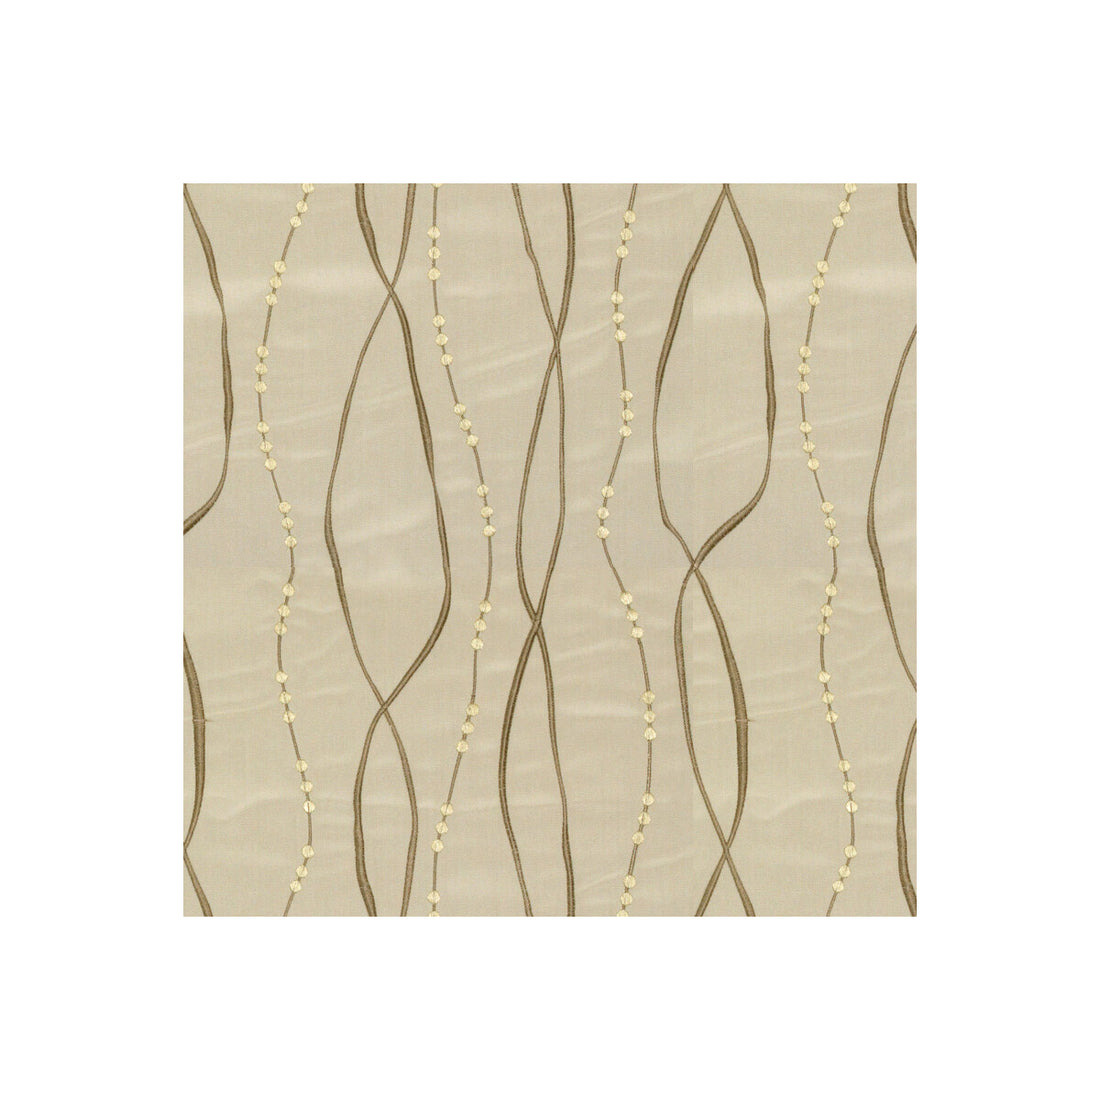 Entwine Emb fabric in taupe/lime color - pattern GWF-3221.411.0 - by Lee Jofa Modern in the Ventana Solarium collection